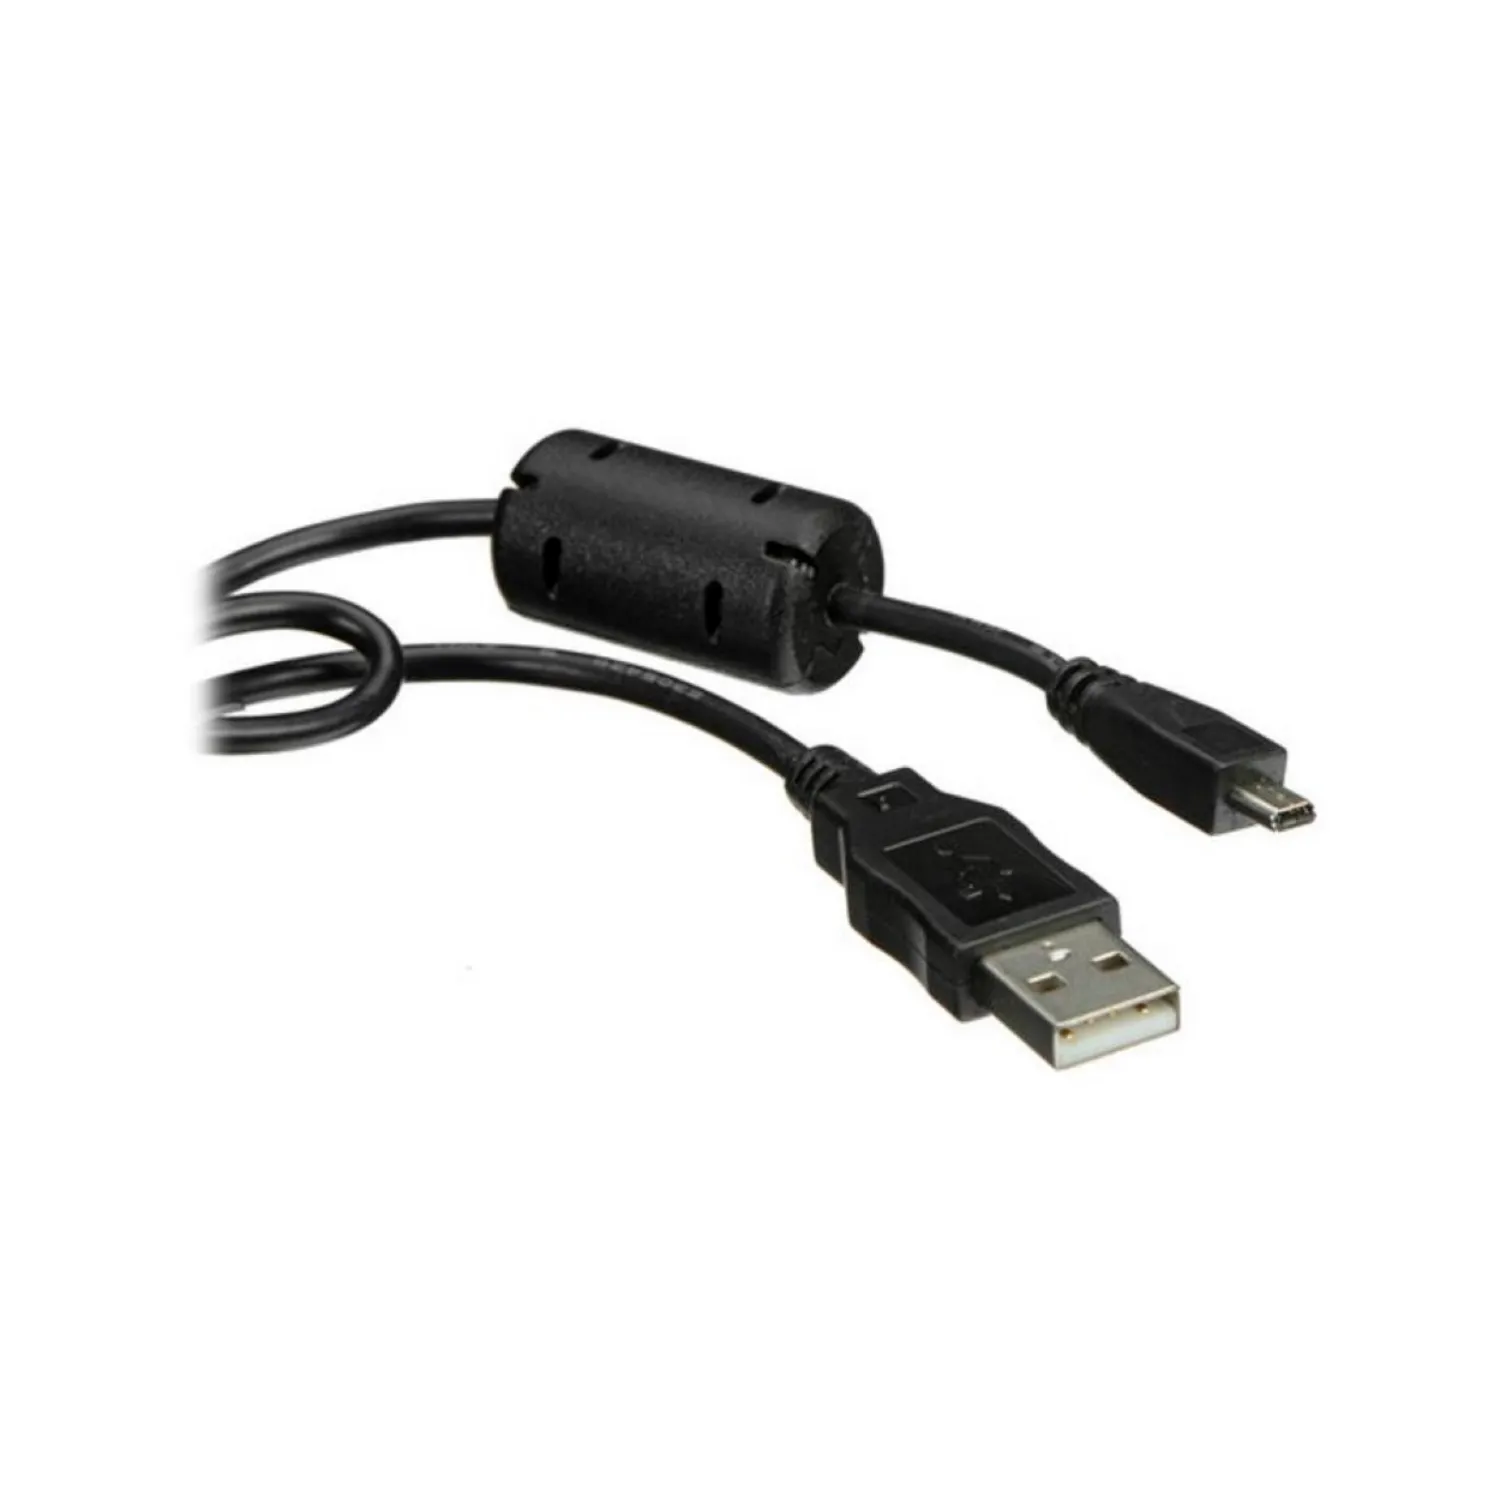 Sigma USB Cable for DP Quattro Series & FD-11 USB Dock